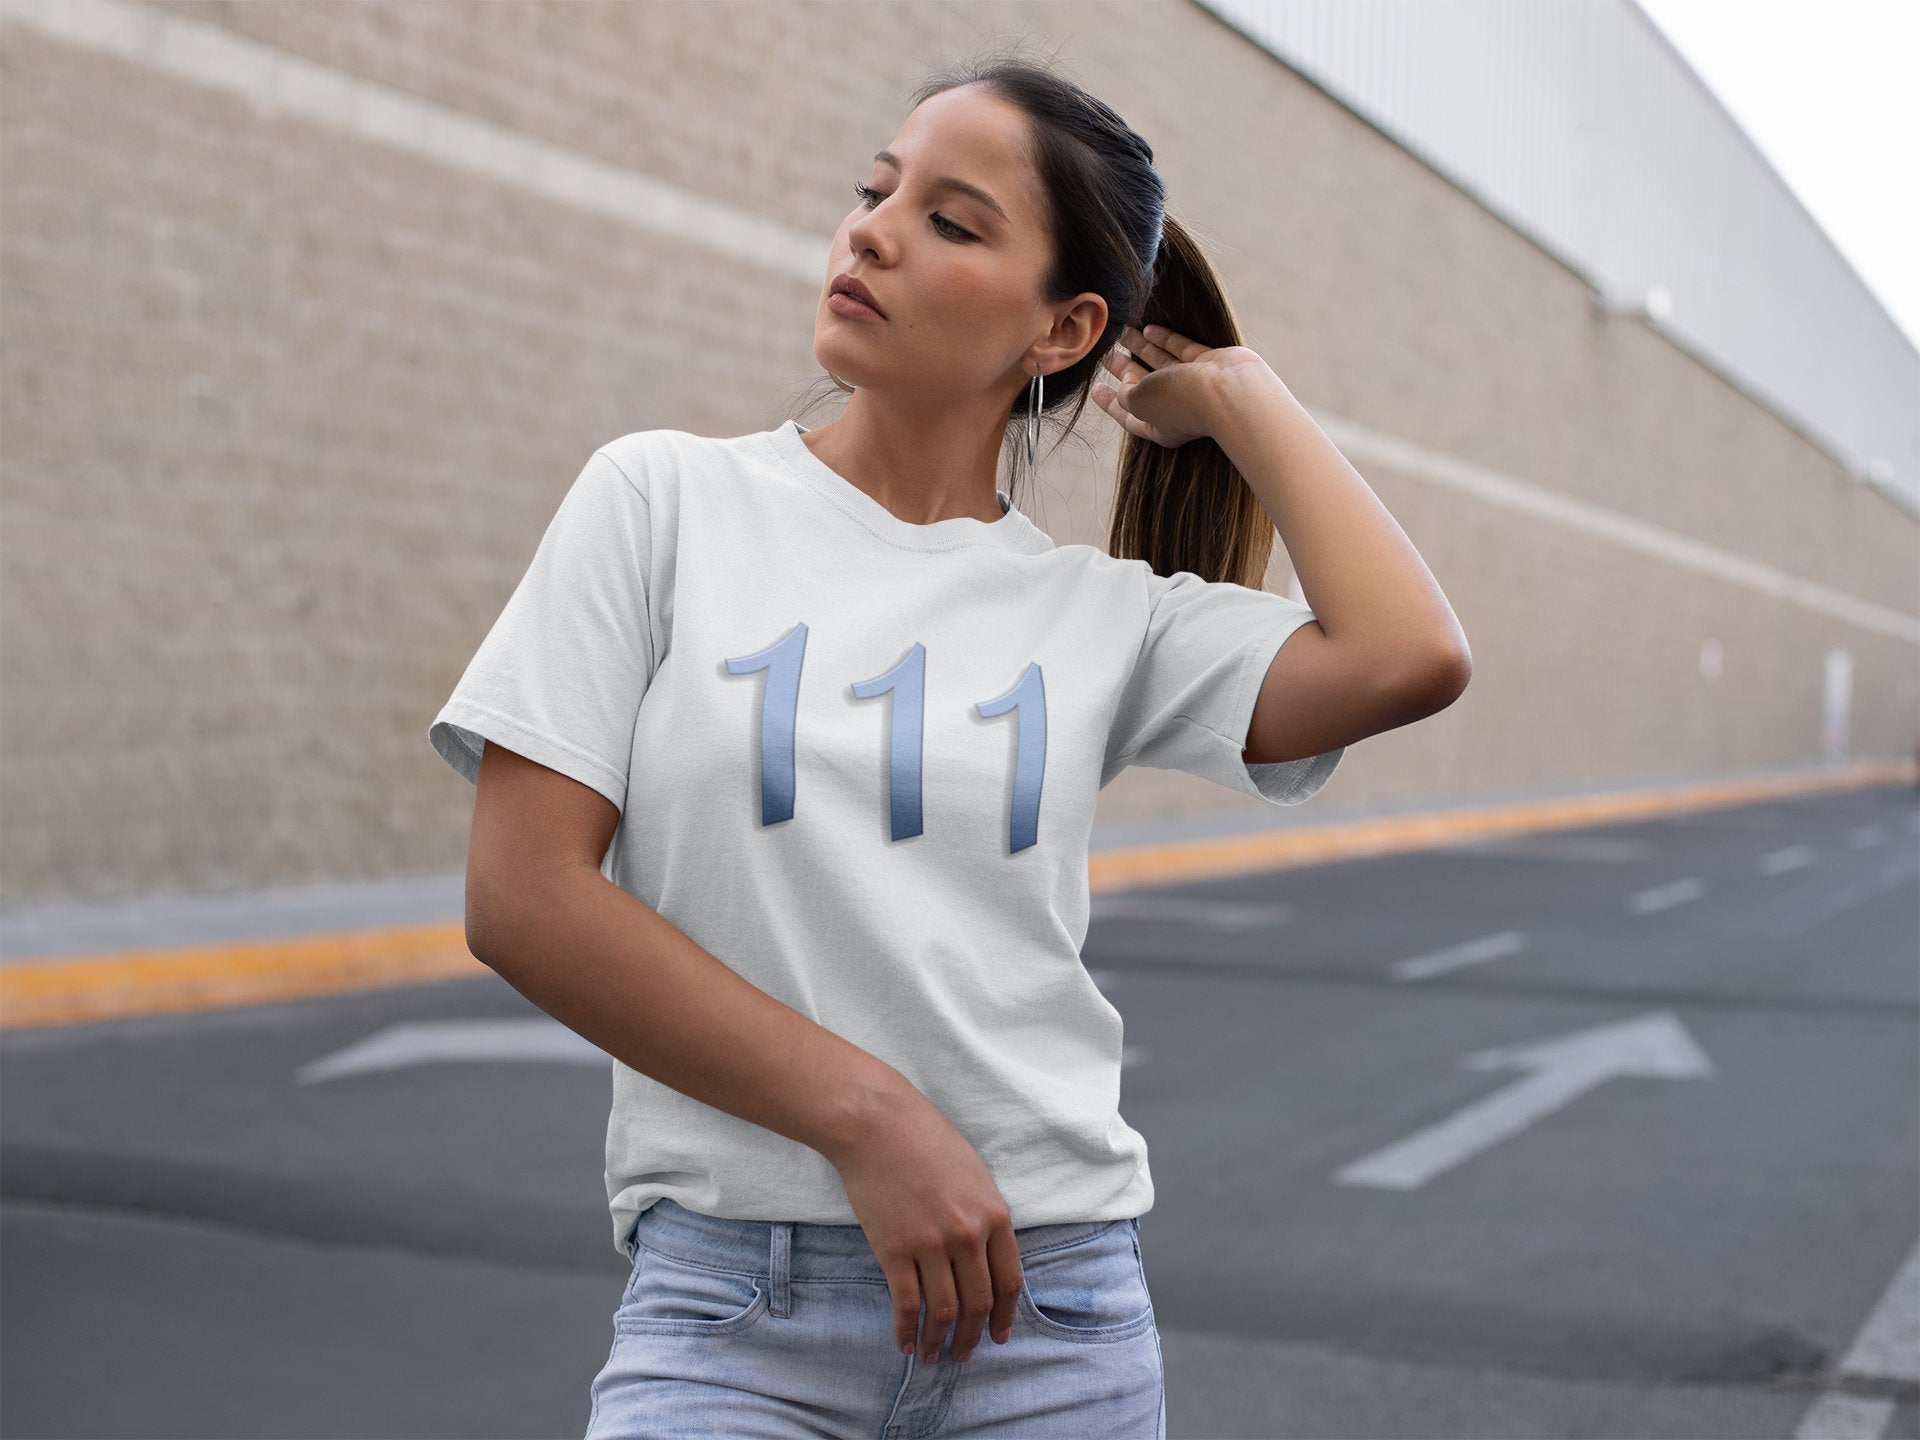 Angel Numbers - 111 - Adult Unisex T-Shirt